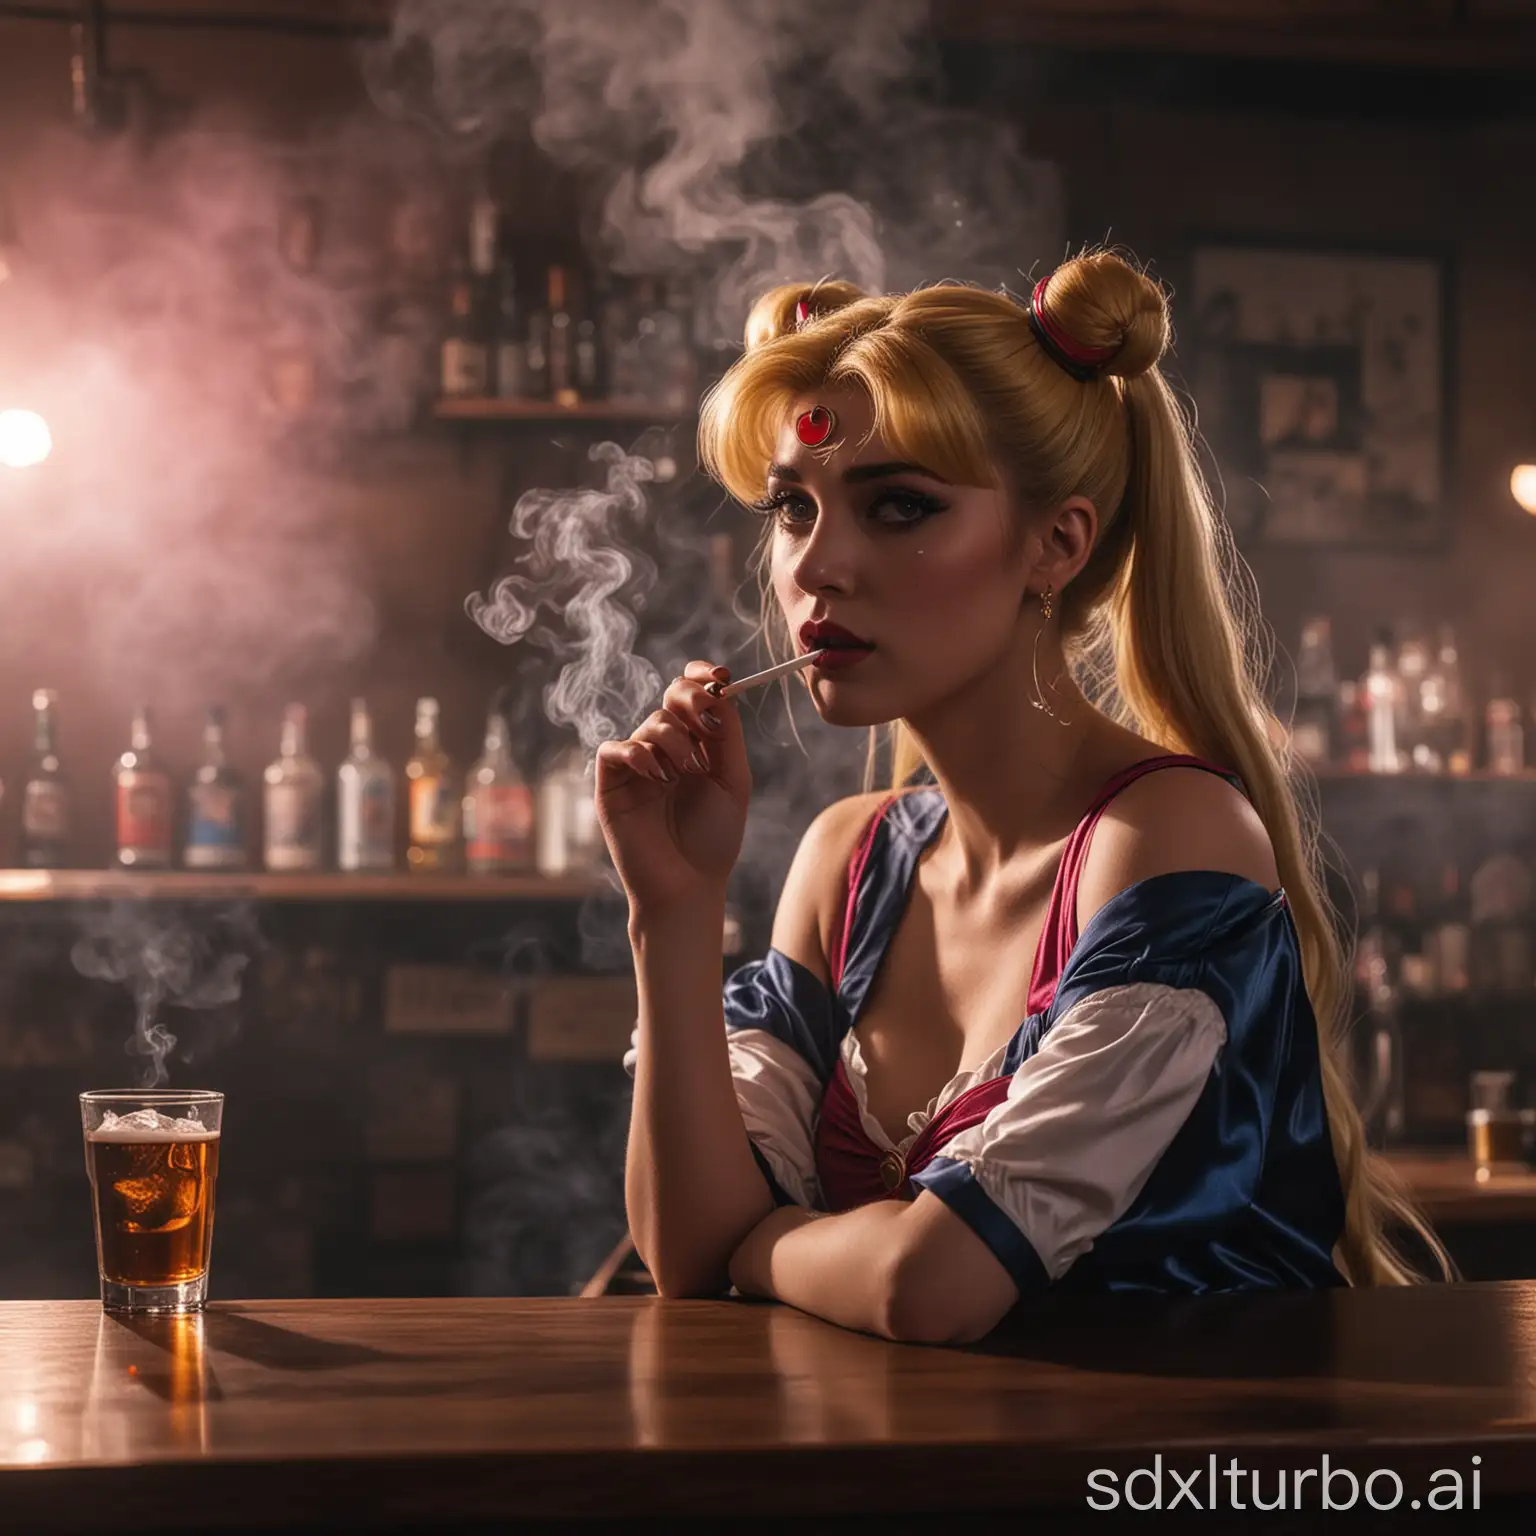 photo of sailor moon at the bar counter, smoking, looking sad. Dark ambient, heavy smoke and lasers on the air